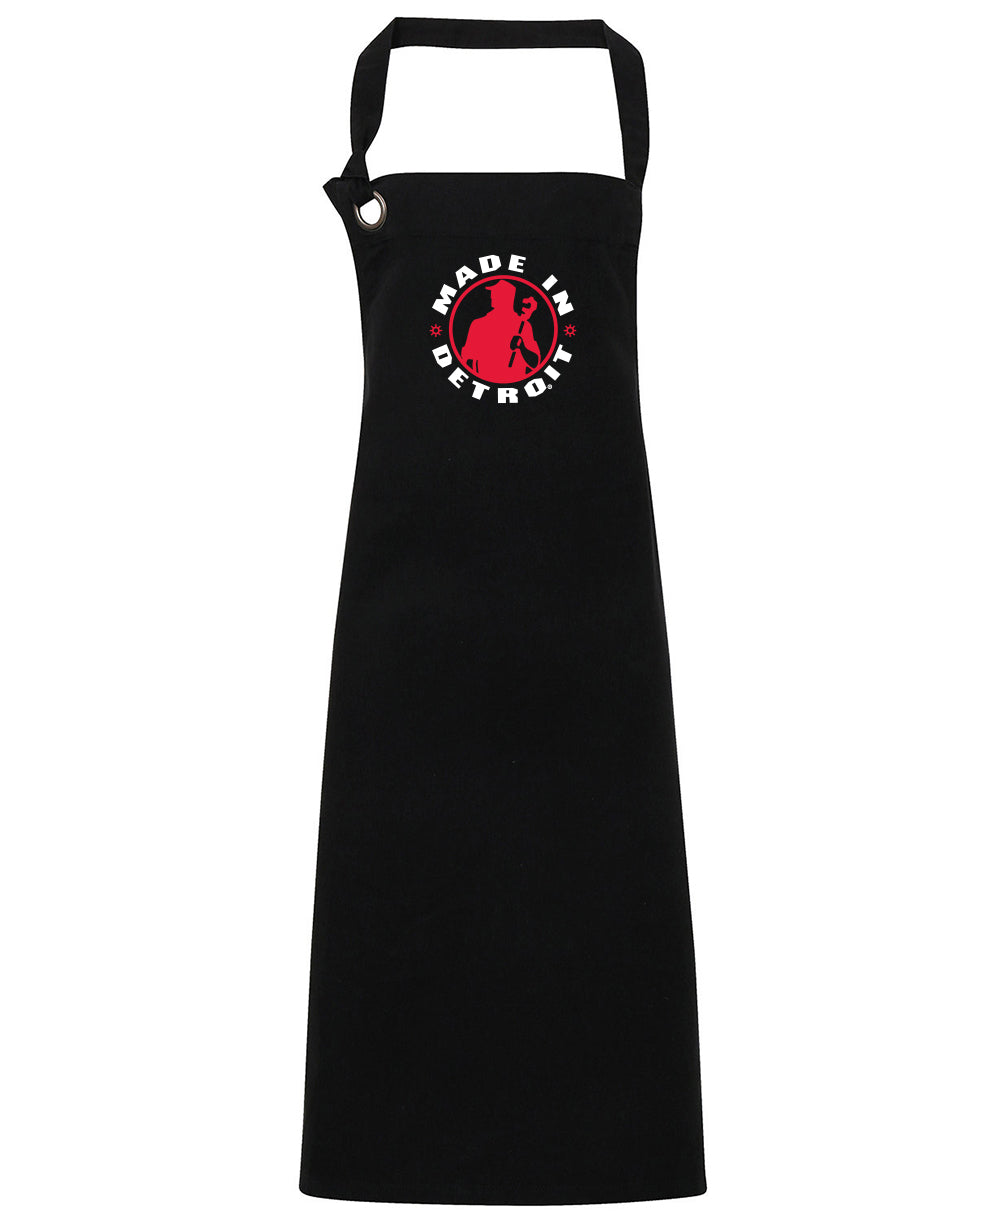 MID Grilling Aprons